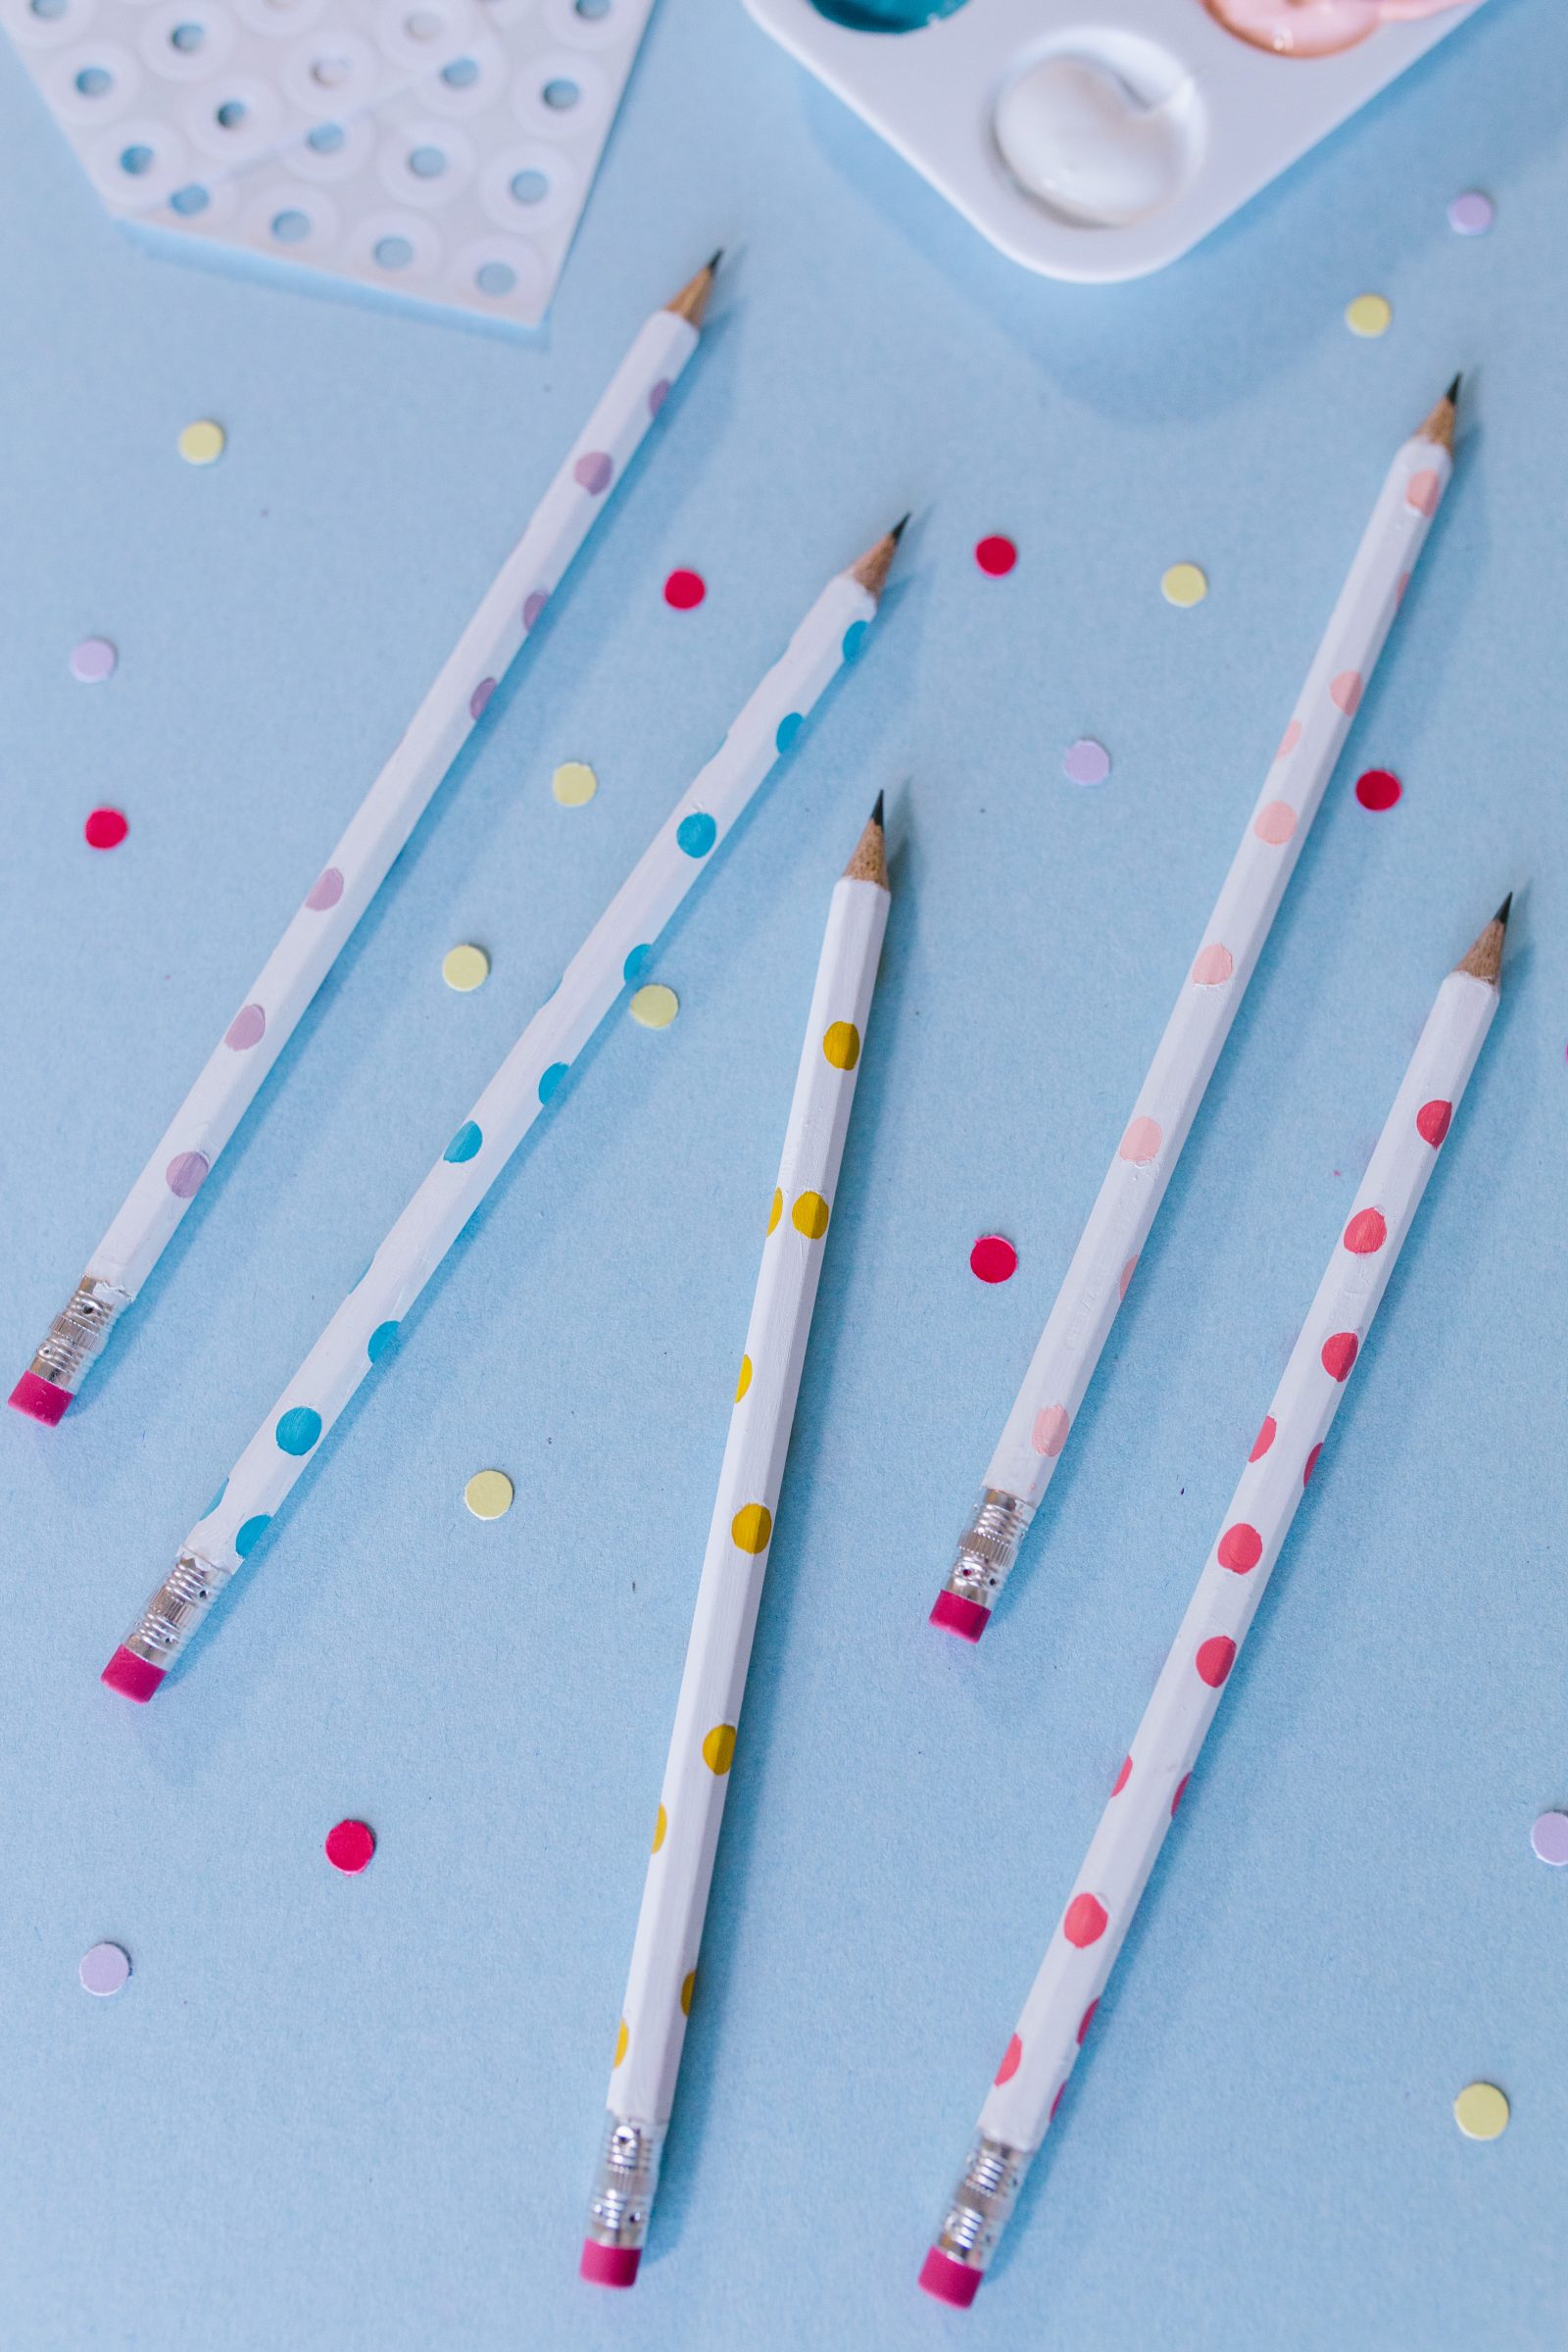 Back to School Crafts: How to Make Embellished Pencils 3 Ways + a tutorial featured by Top US Craft Blog + The Pretty Life Girls + DIY Polka Dot Embellished Pencils